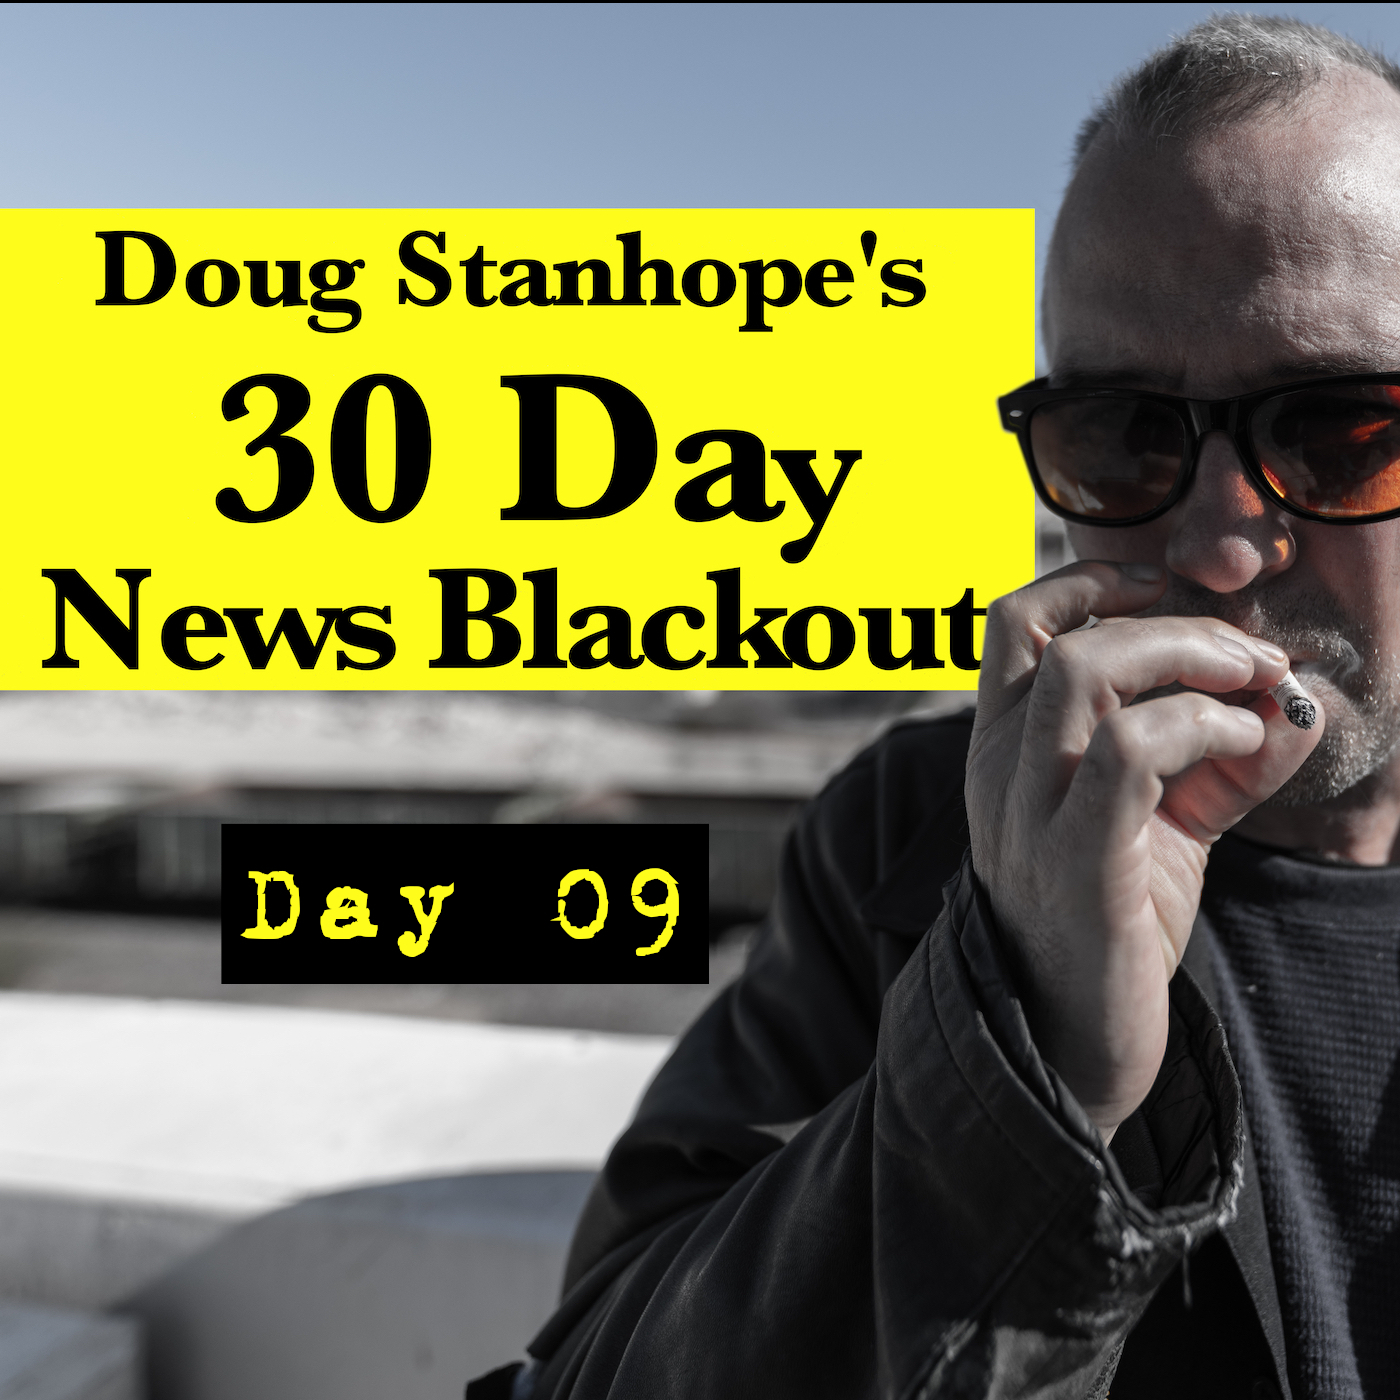 Ep.#373: Day 09 - Stanhope’s 30 Day News Blackout